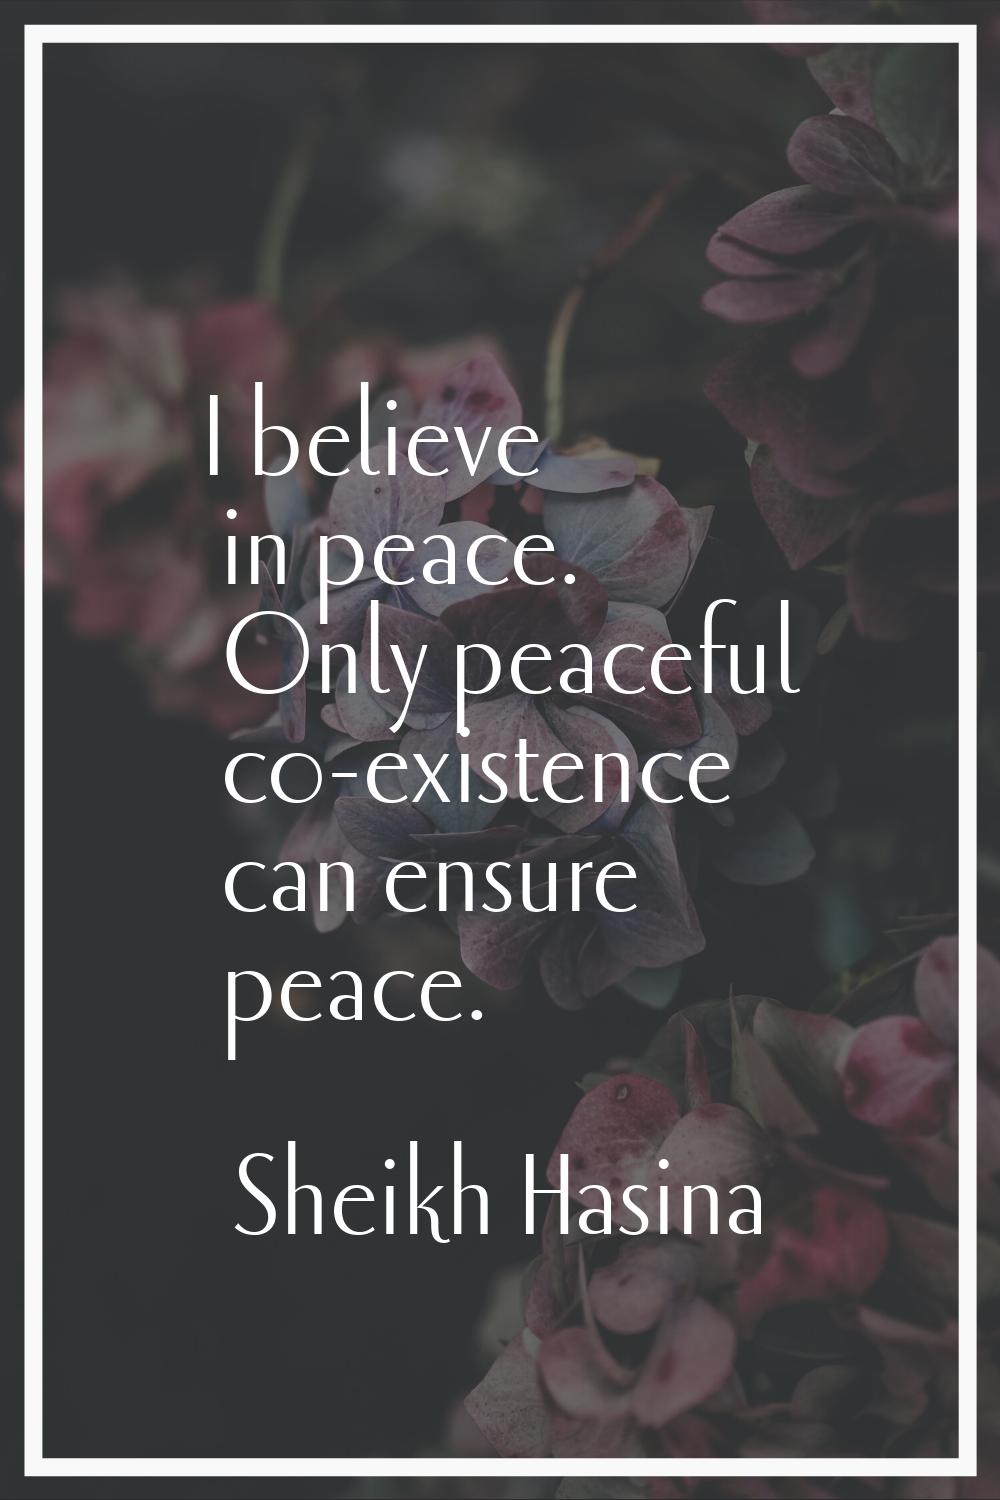 I believe in peace. Only peaceful co-existence can ensure peace.